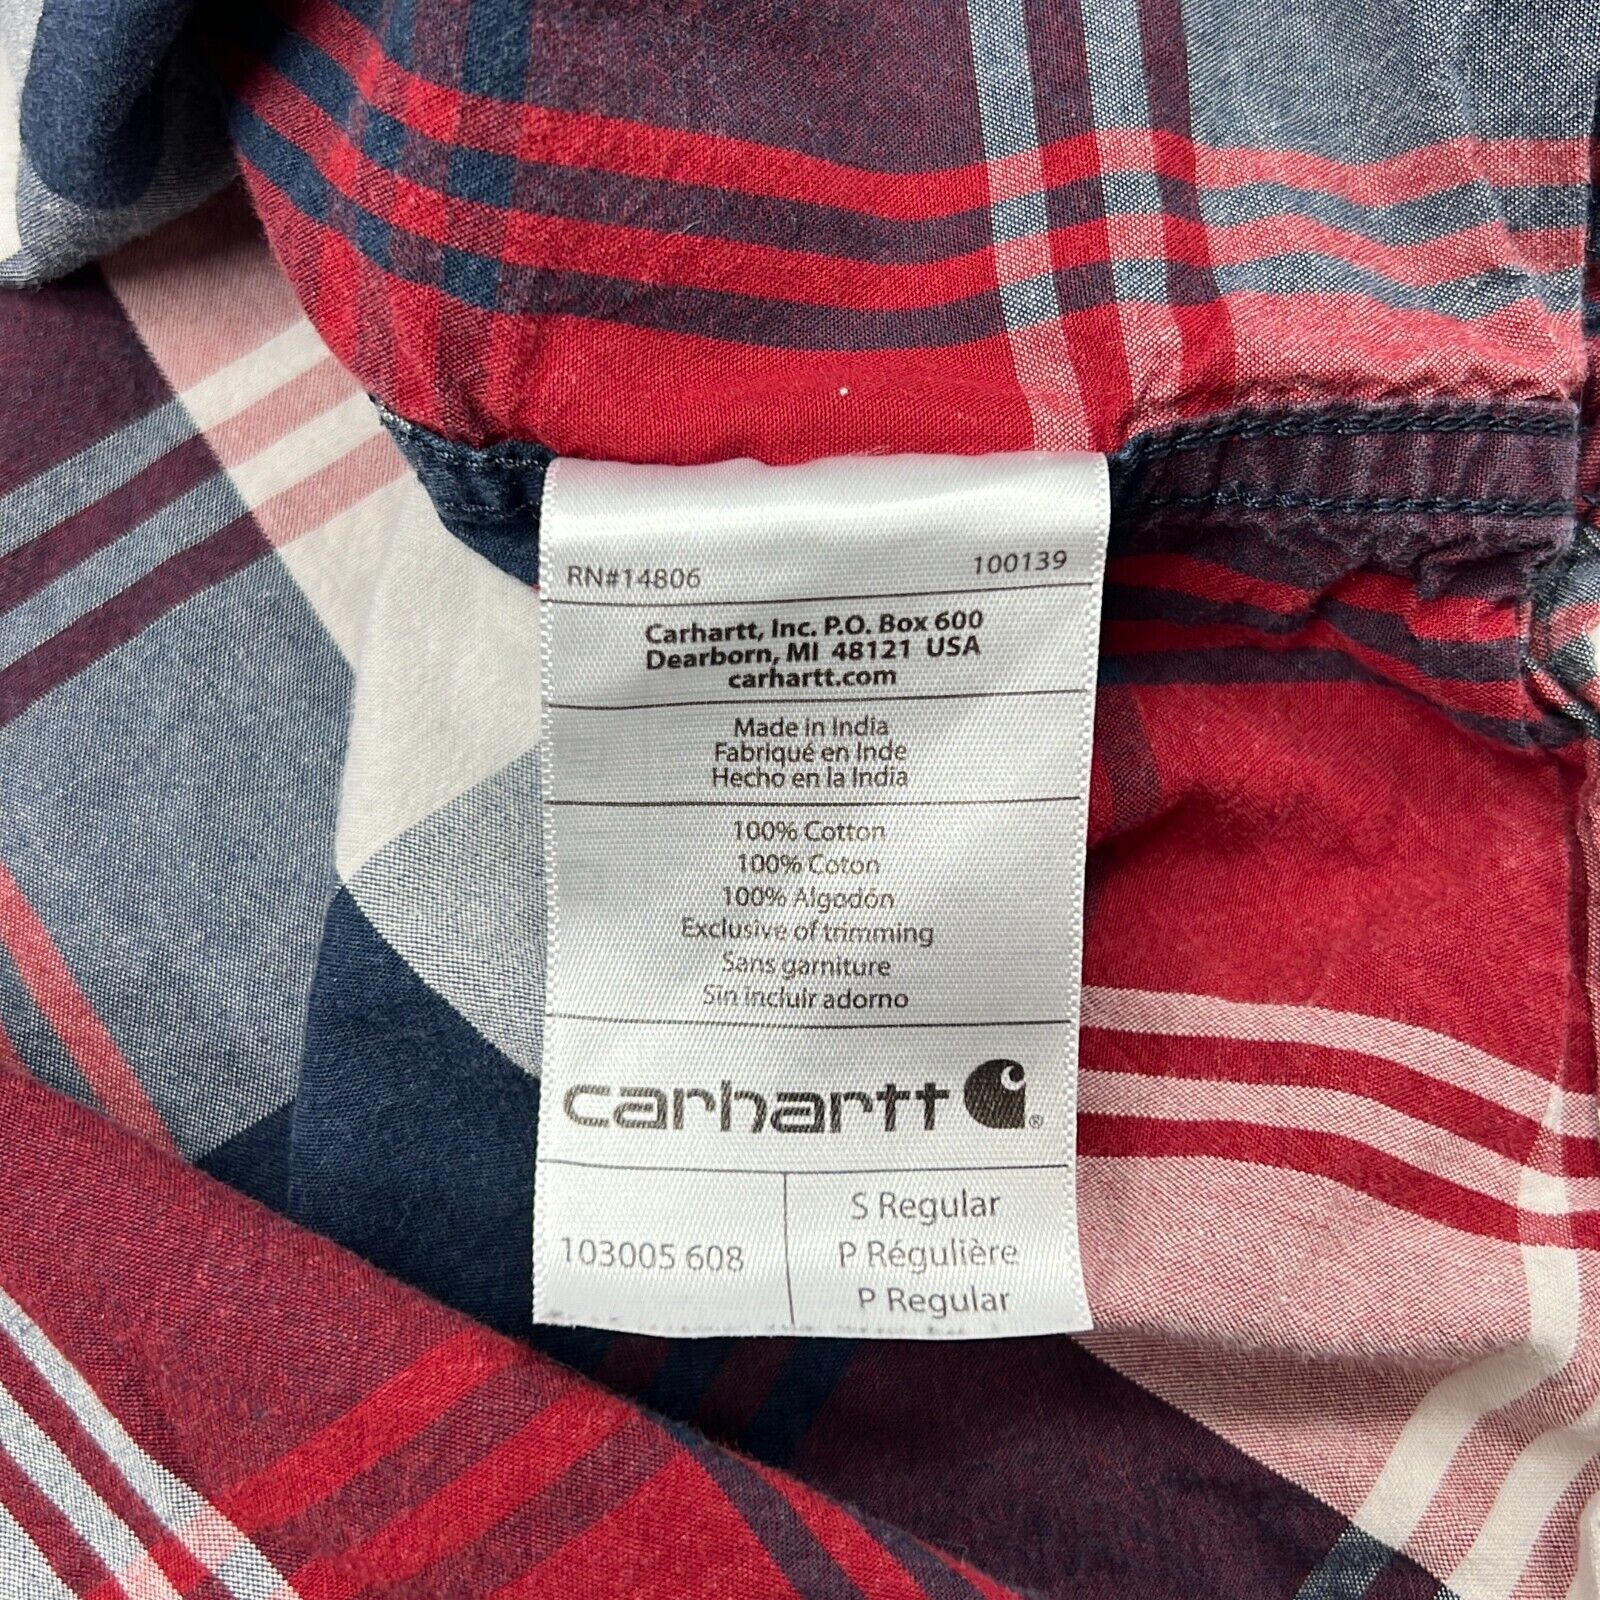 Carhartt Red White Blue Plaid Cotton Short Sleeve Button-Up Shirt Size Small